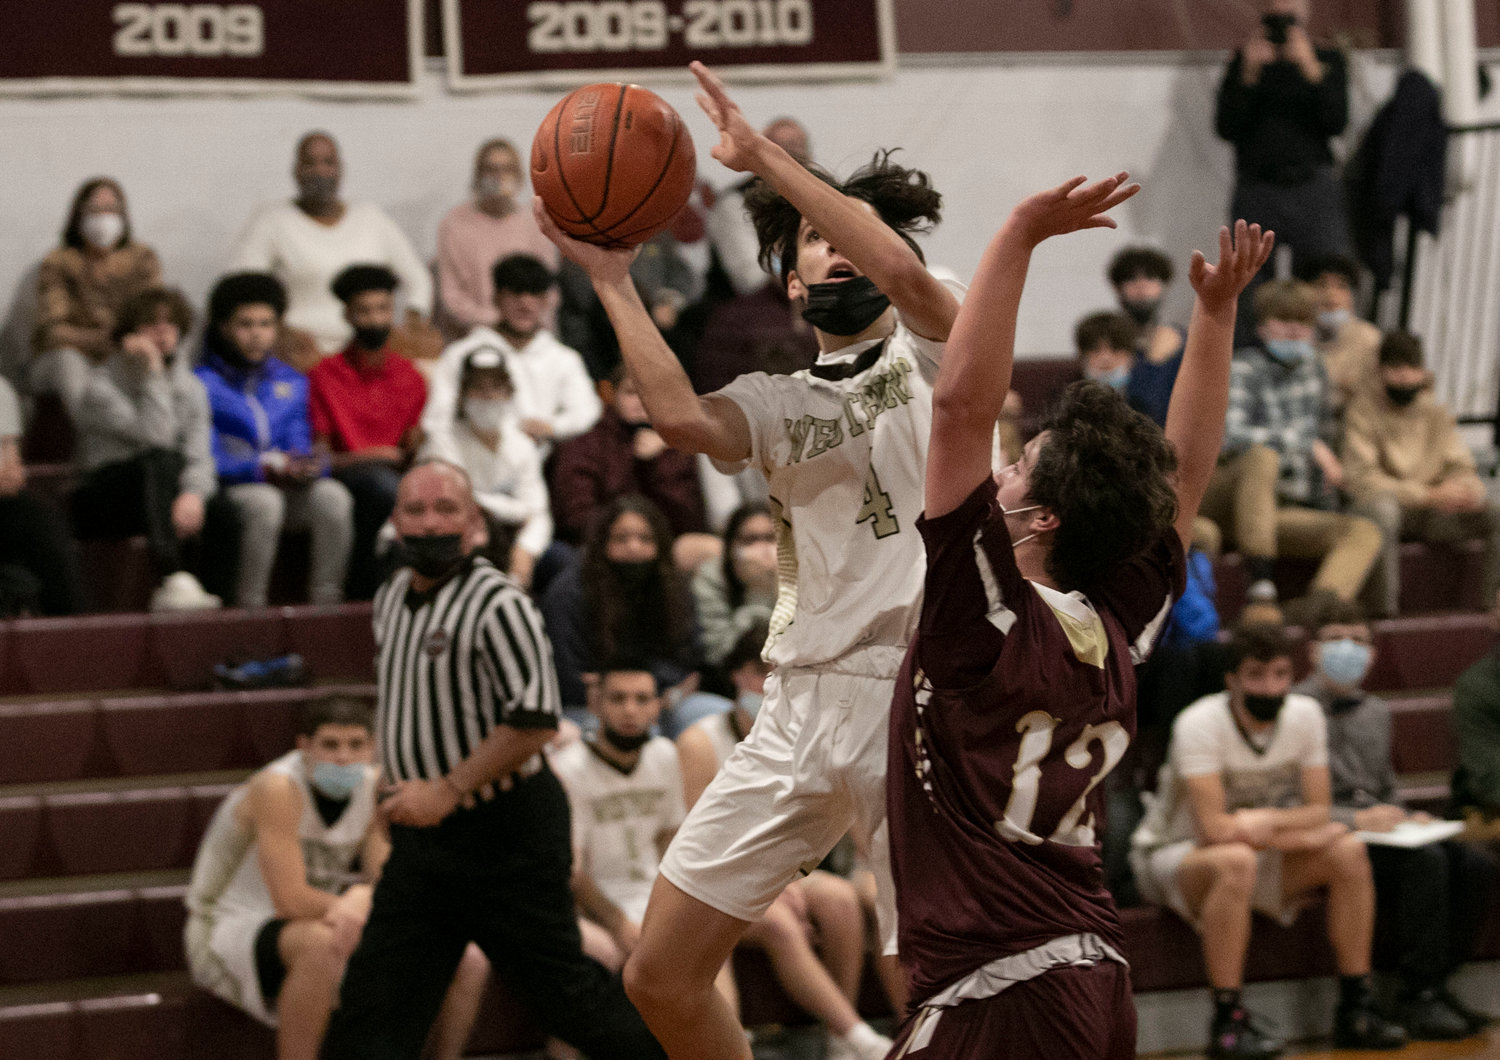 Westport guard Ben Boudria leaps over Owen Pasquale to make a jumper.